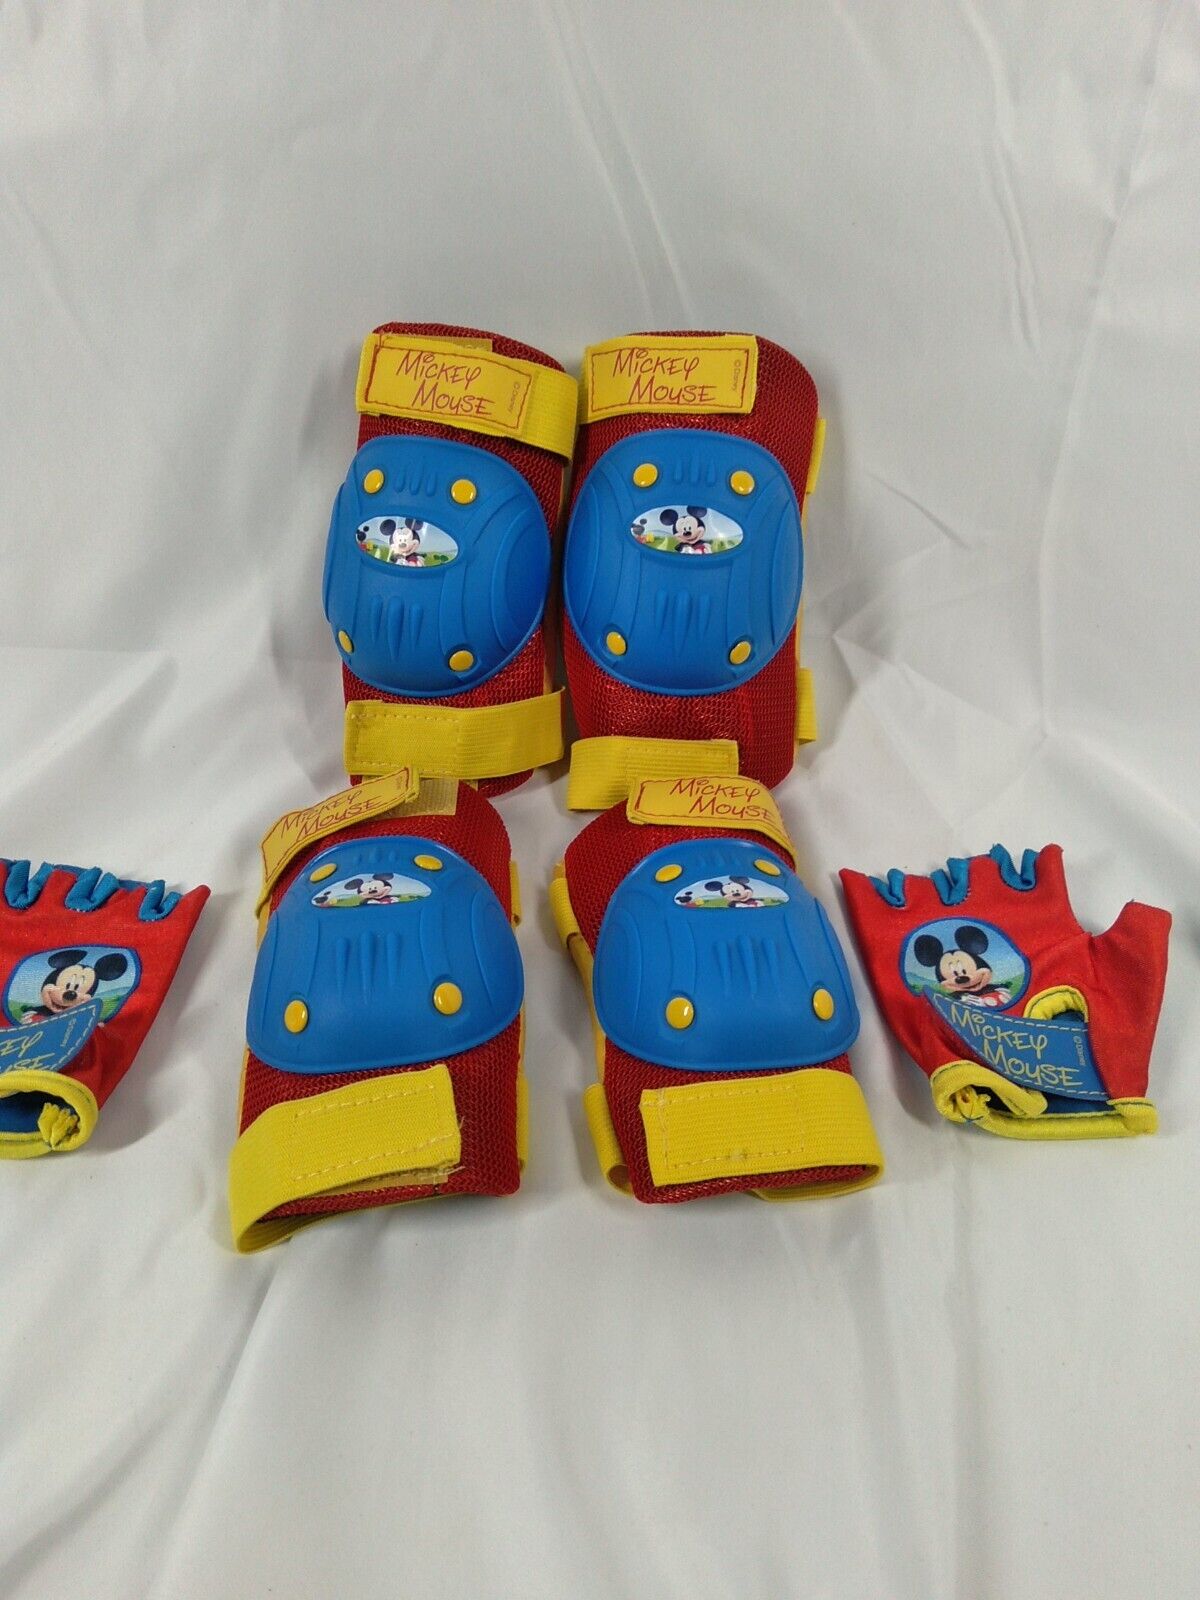 Disney Mickey Mouse Elbow Pads Knee Pads Gloves Bike Skating Child